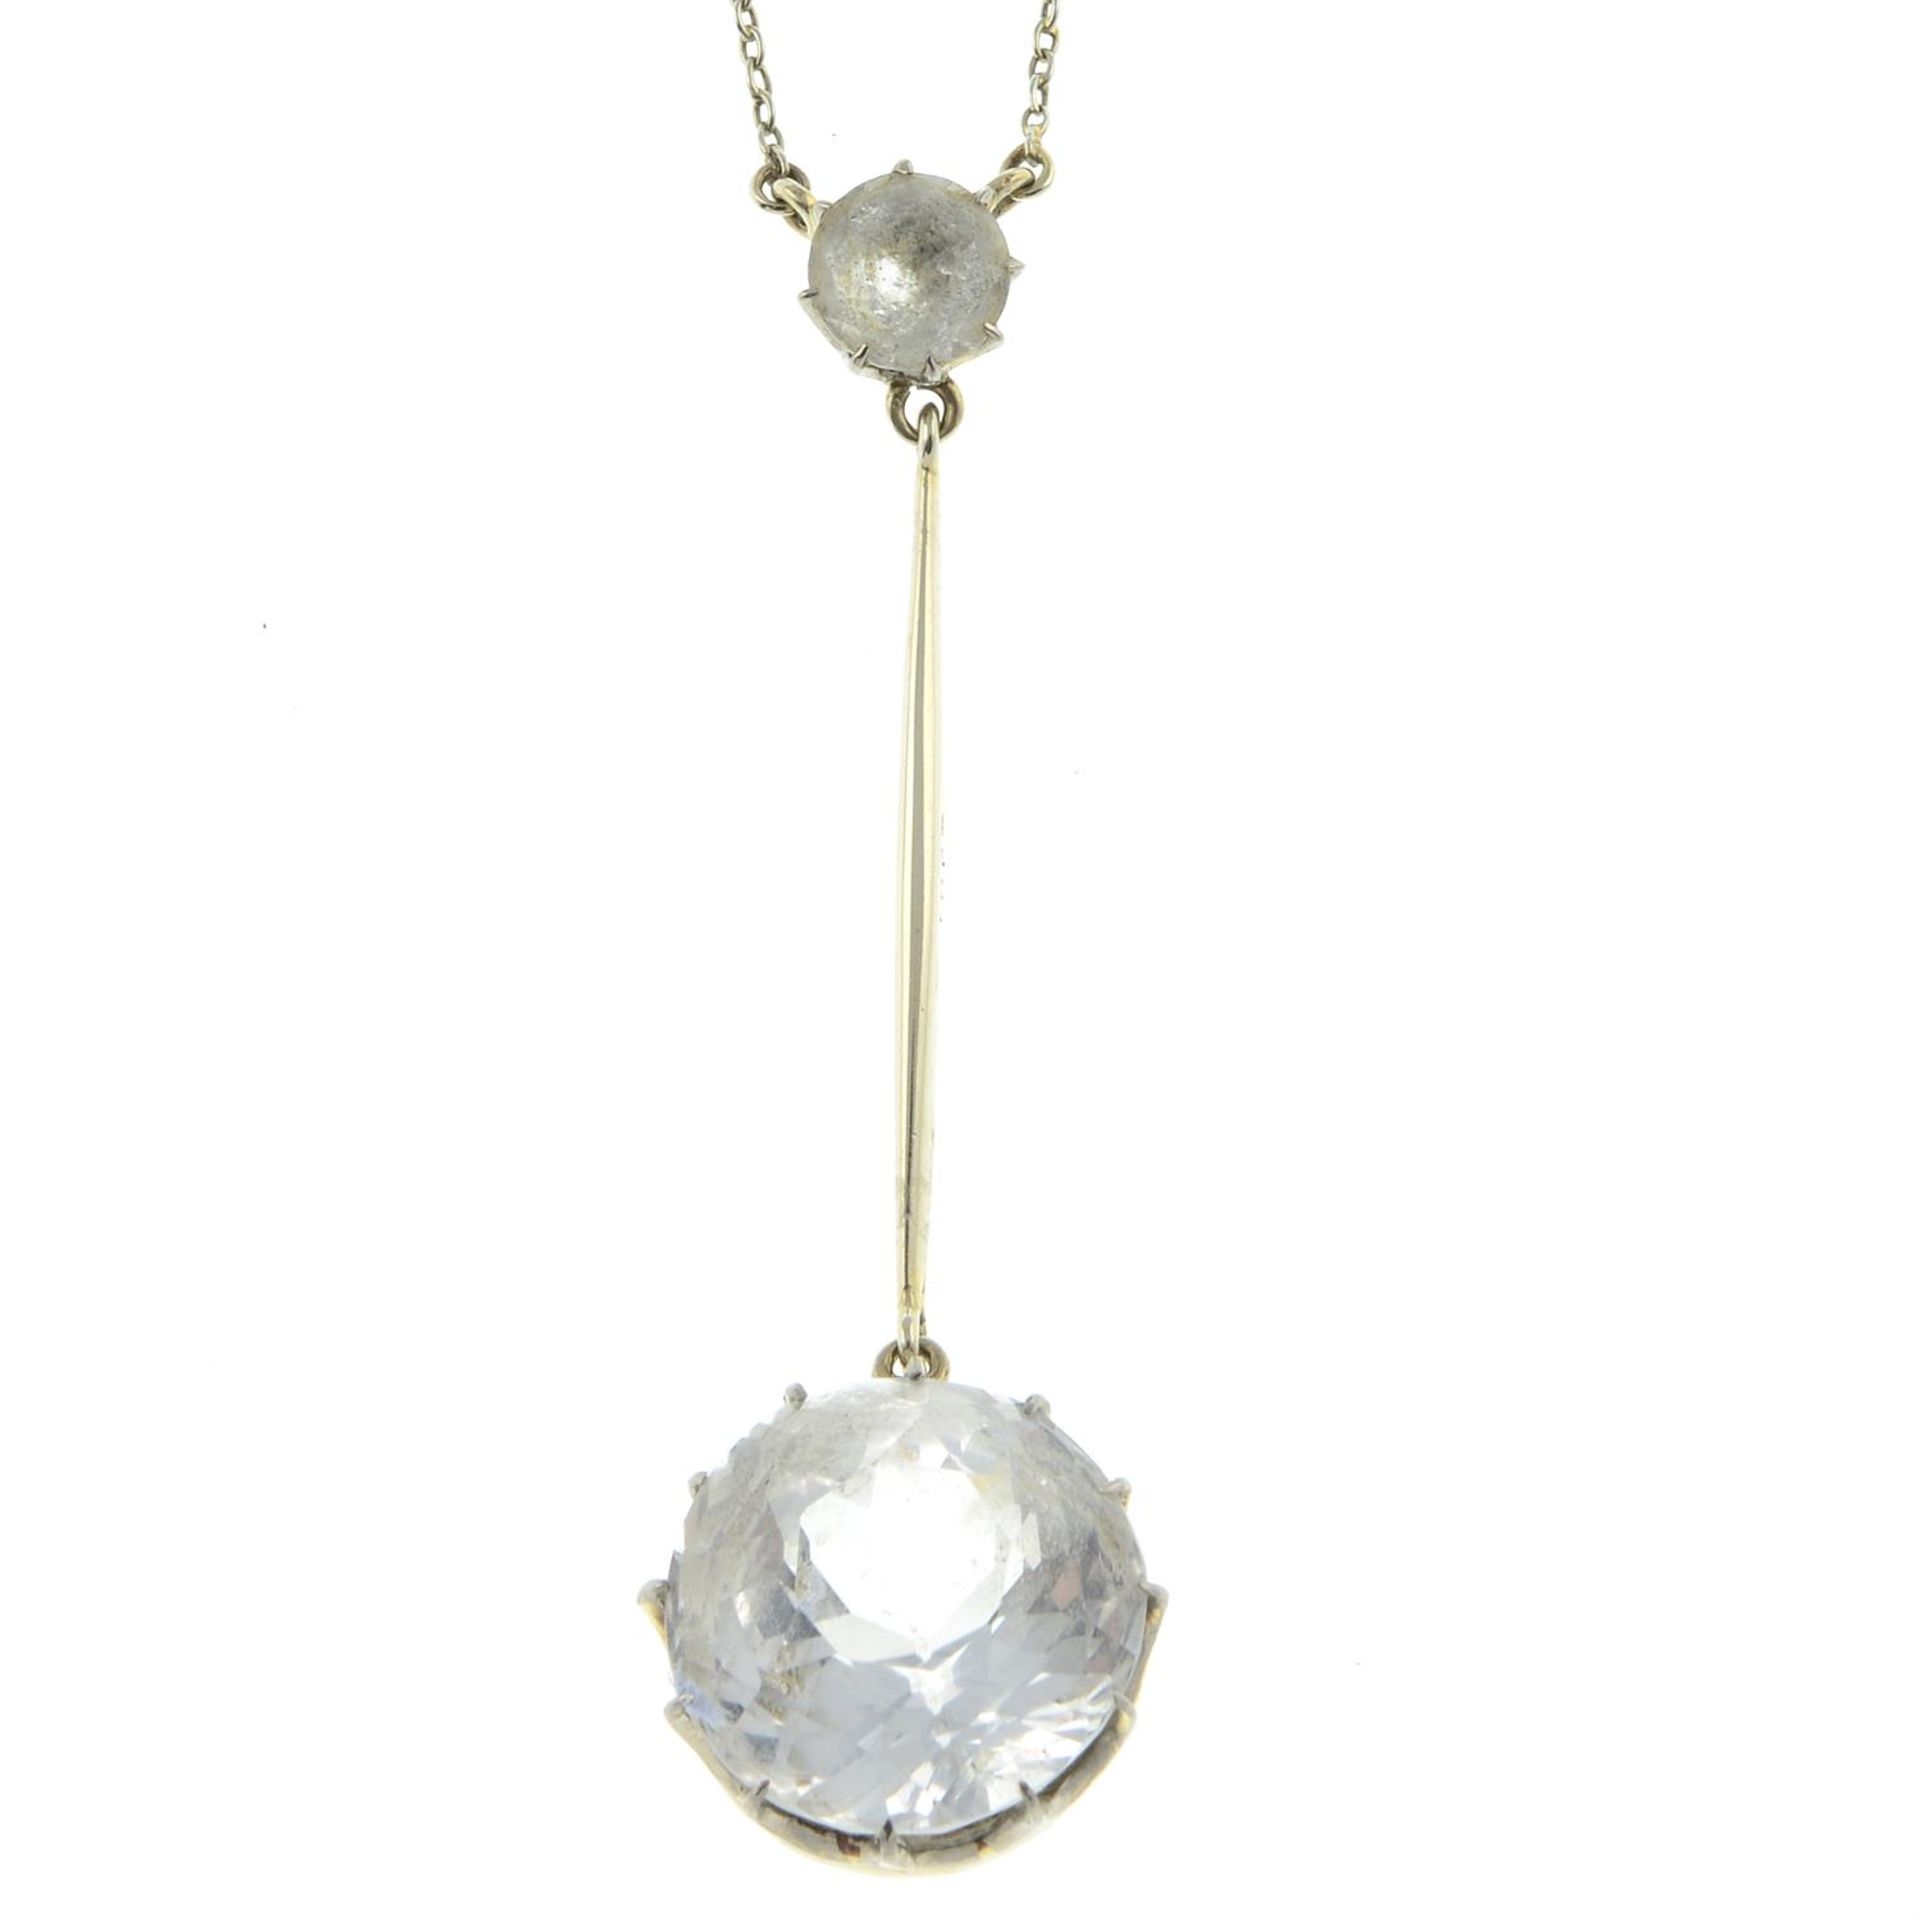 A mid 20th century 18ct gold rock crystal drop pendant, with integral chain.